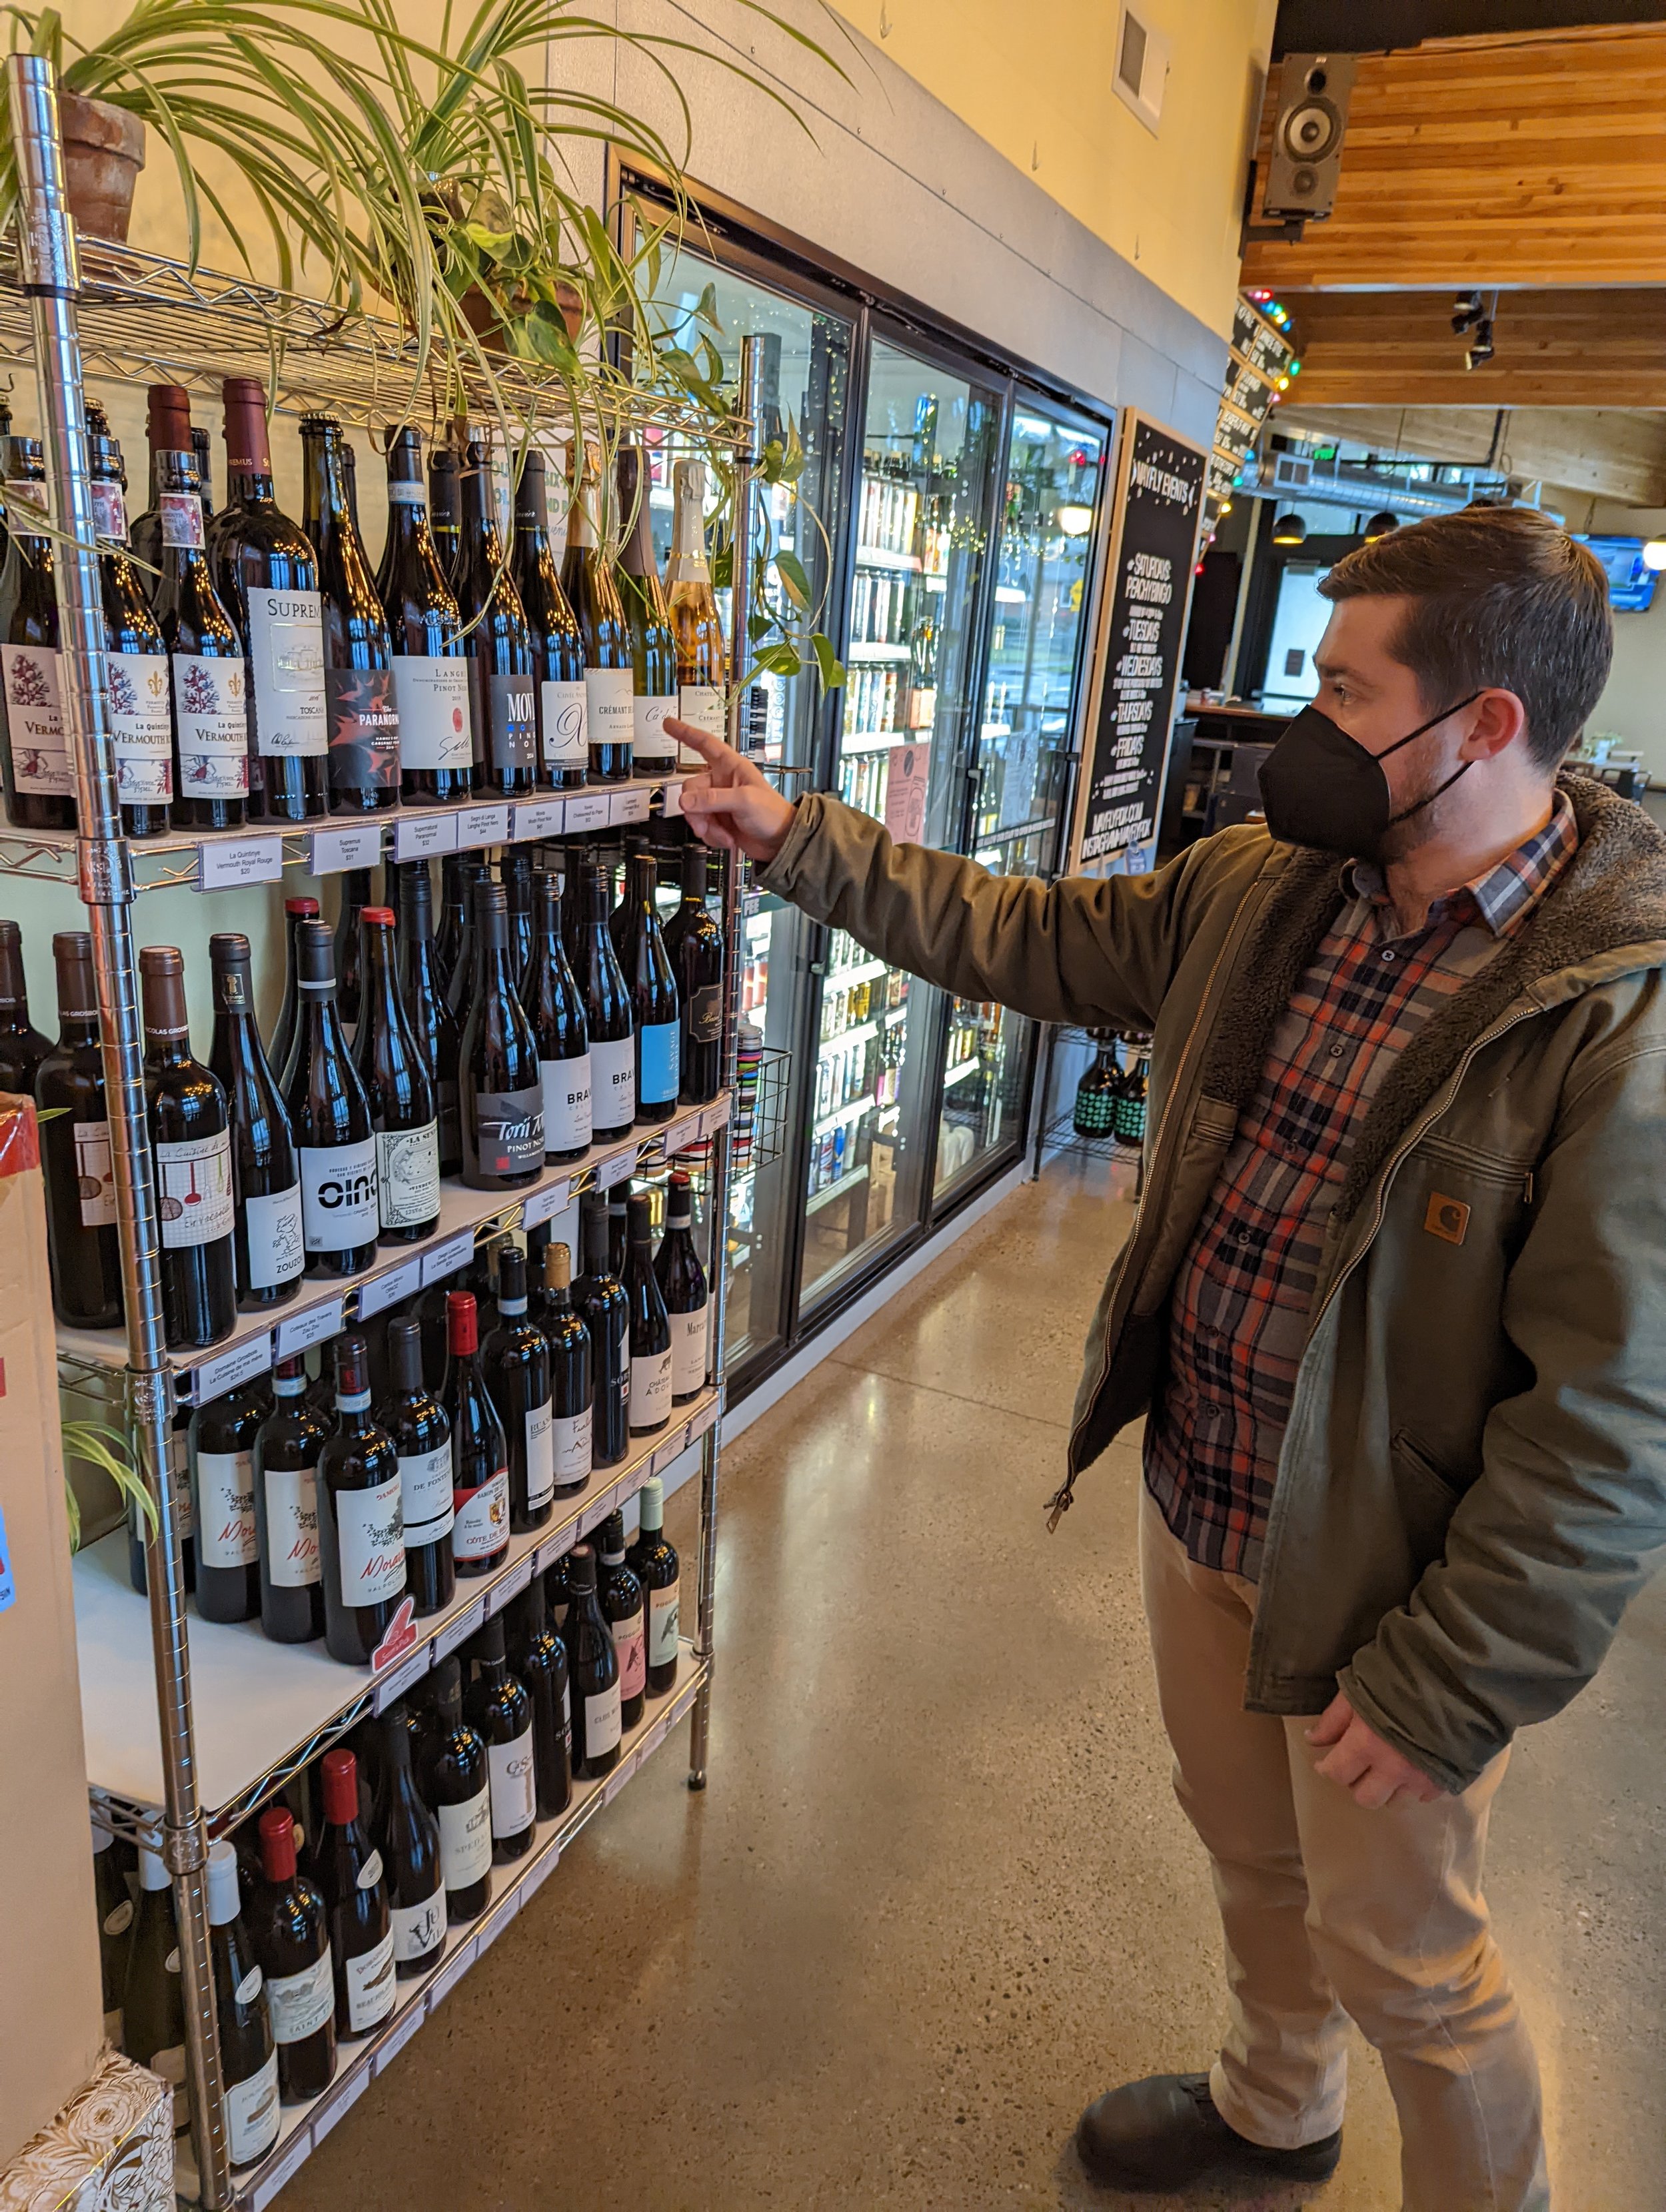 browsing the Mayfly beer and wine selection